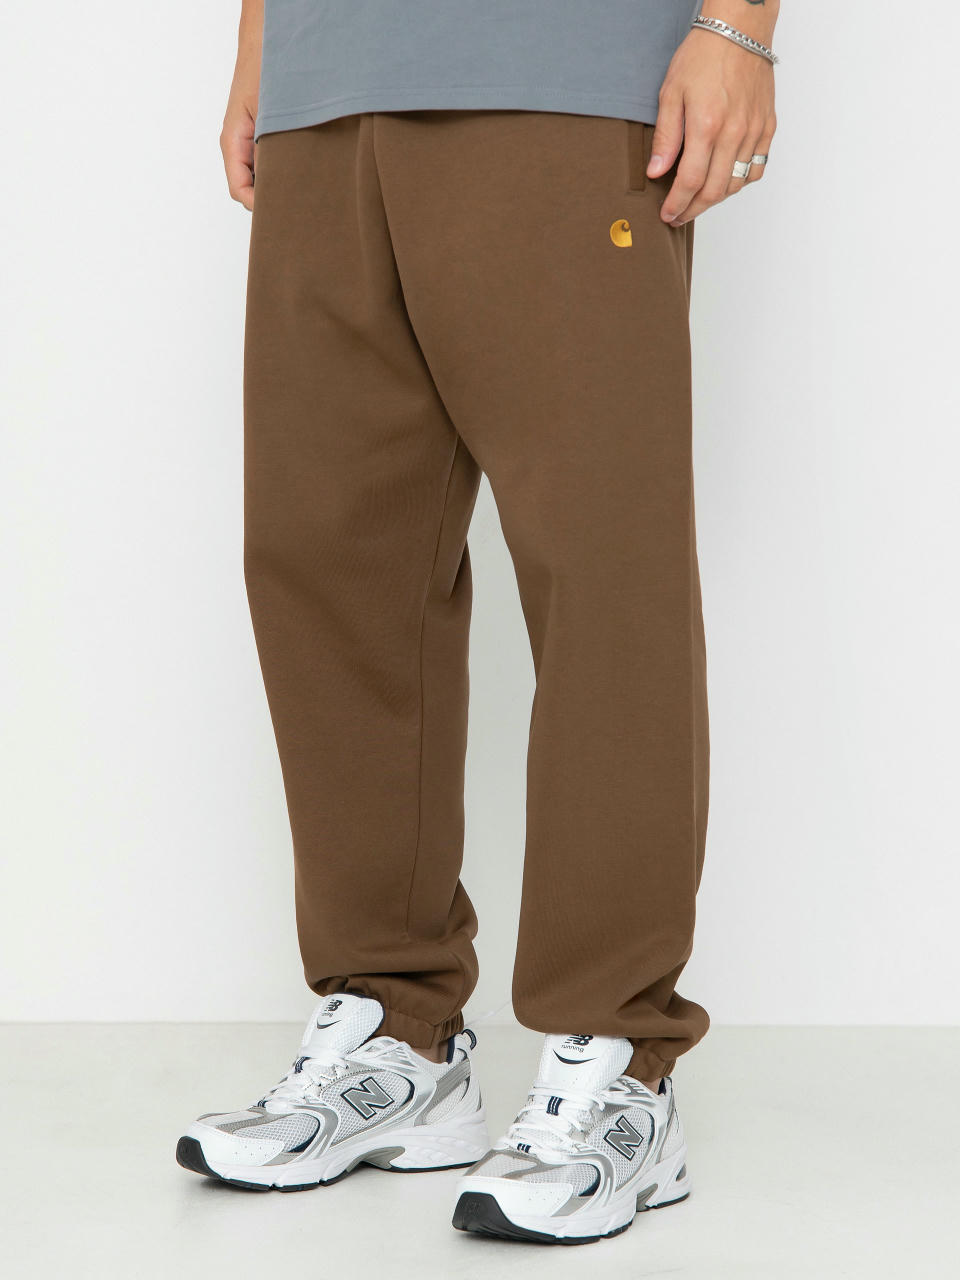 Carhartt WIP Chase Pants (chocolate/gold)